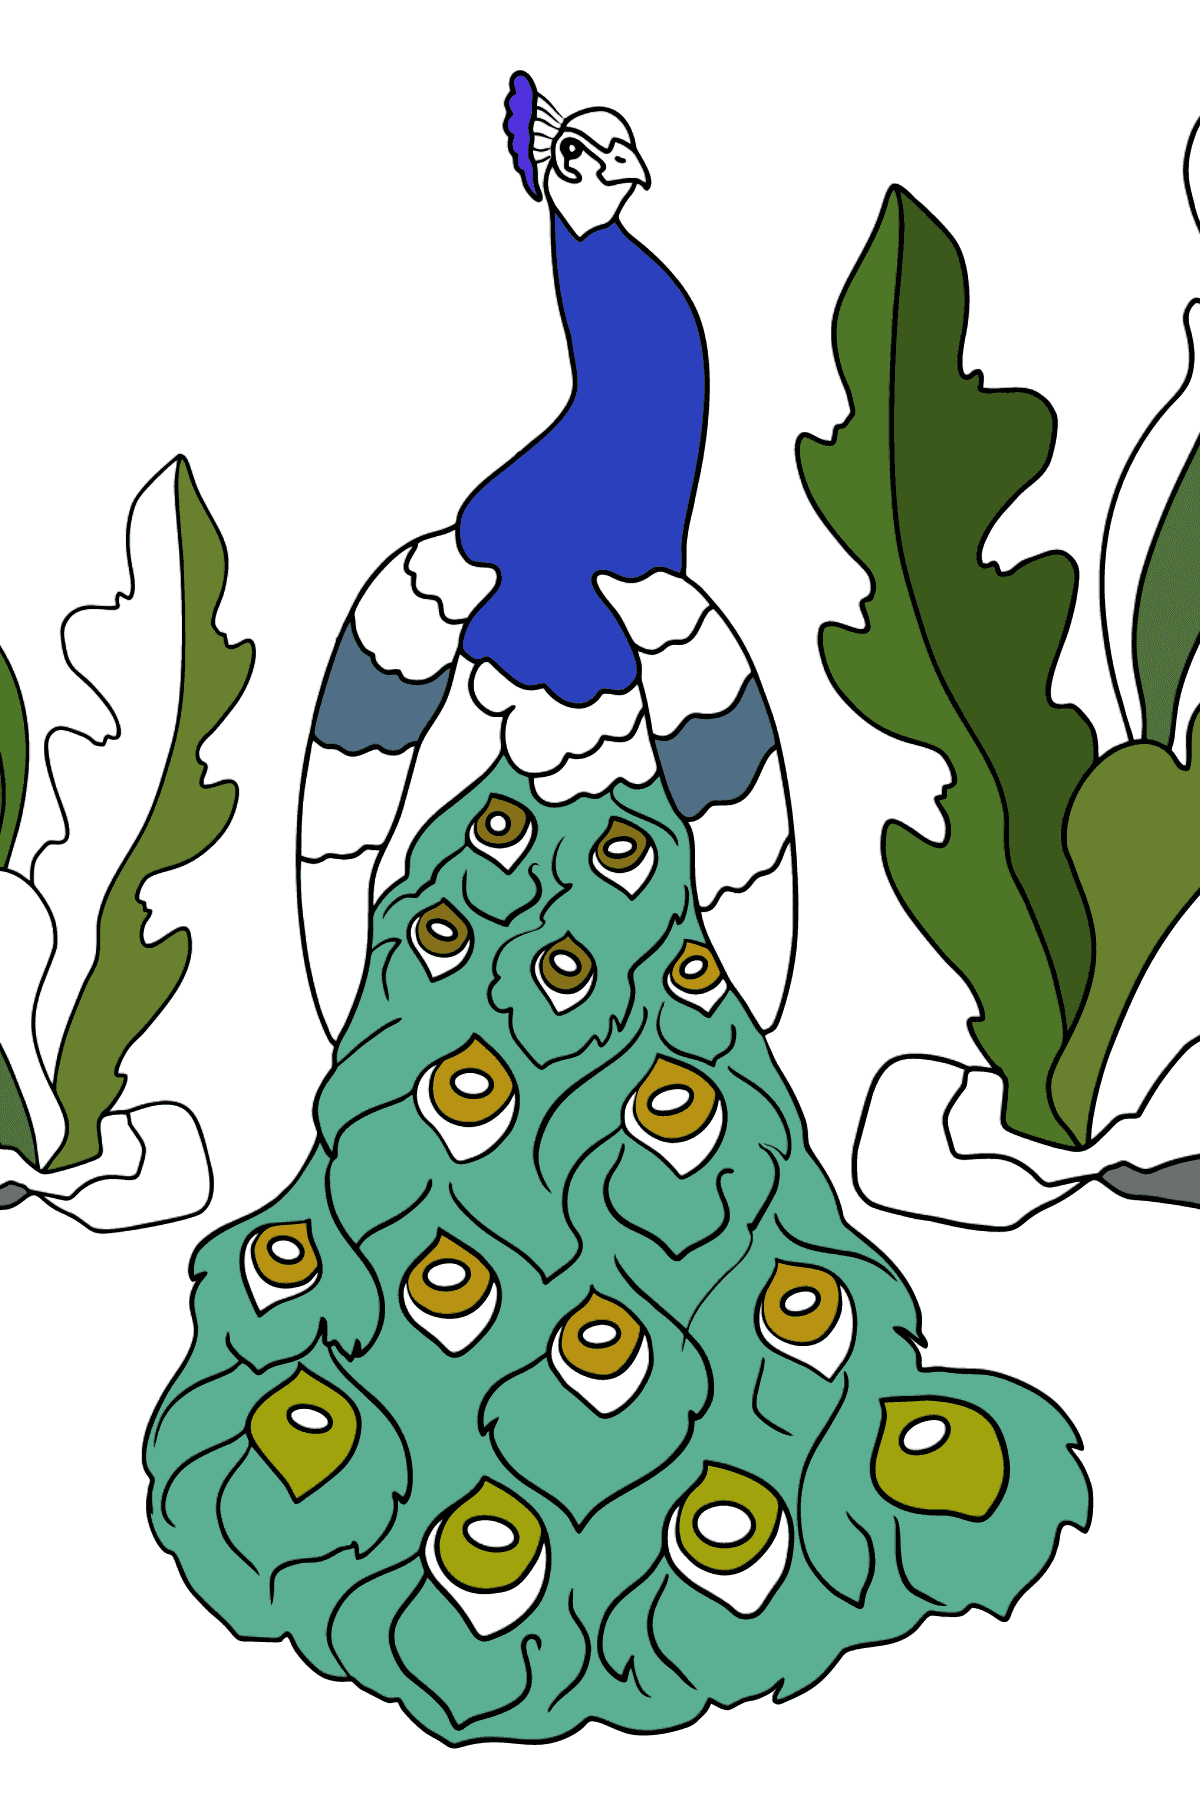 A Peacock Coloring Page - Coloring Pages for Kids